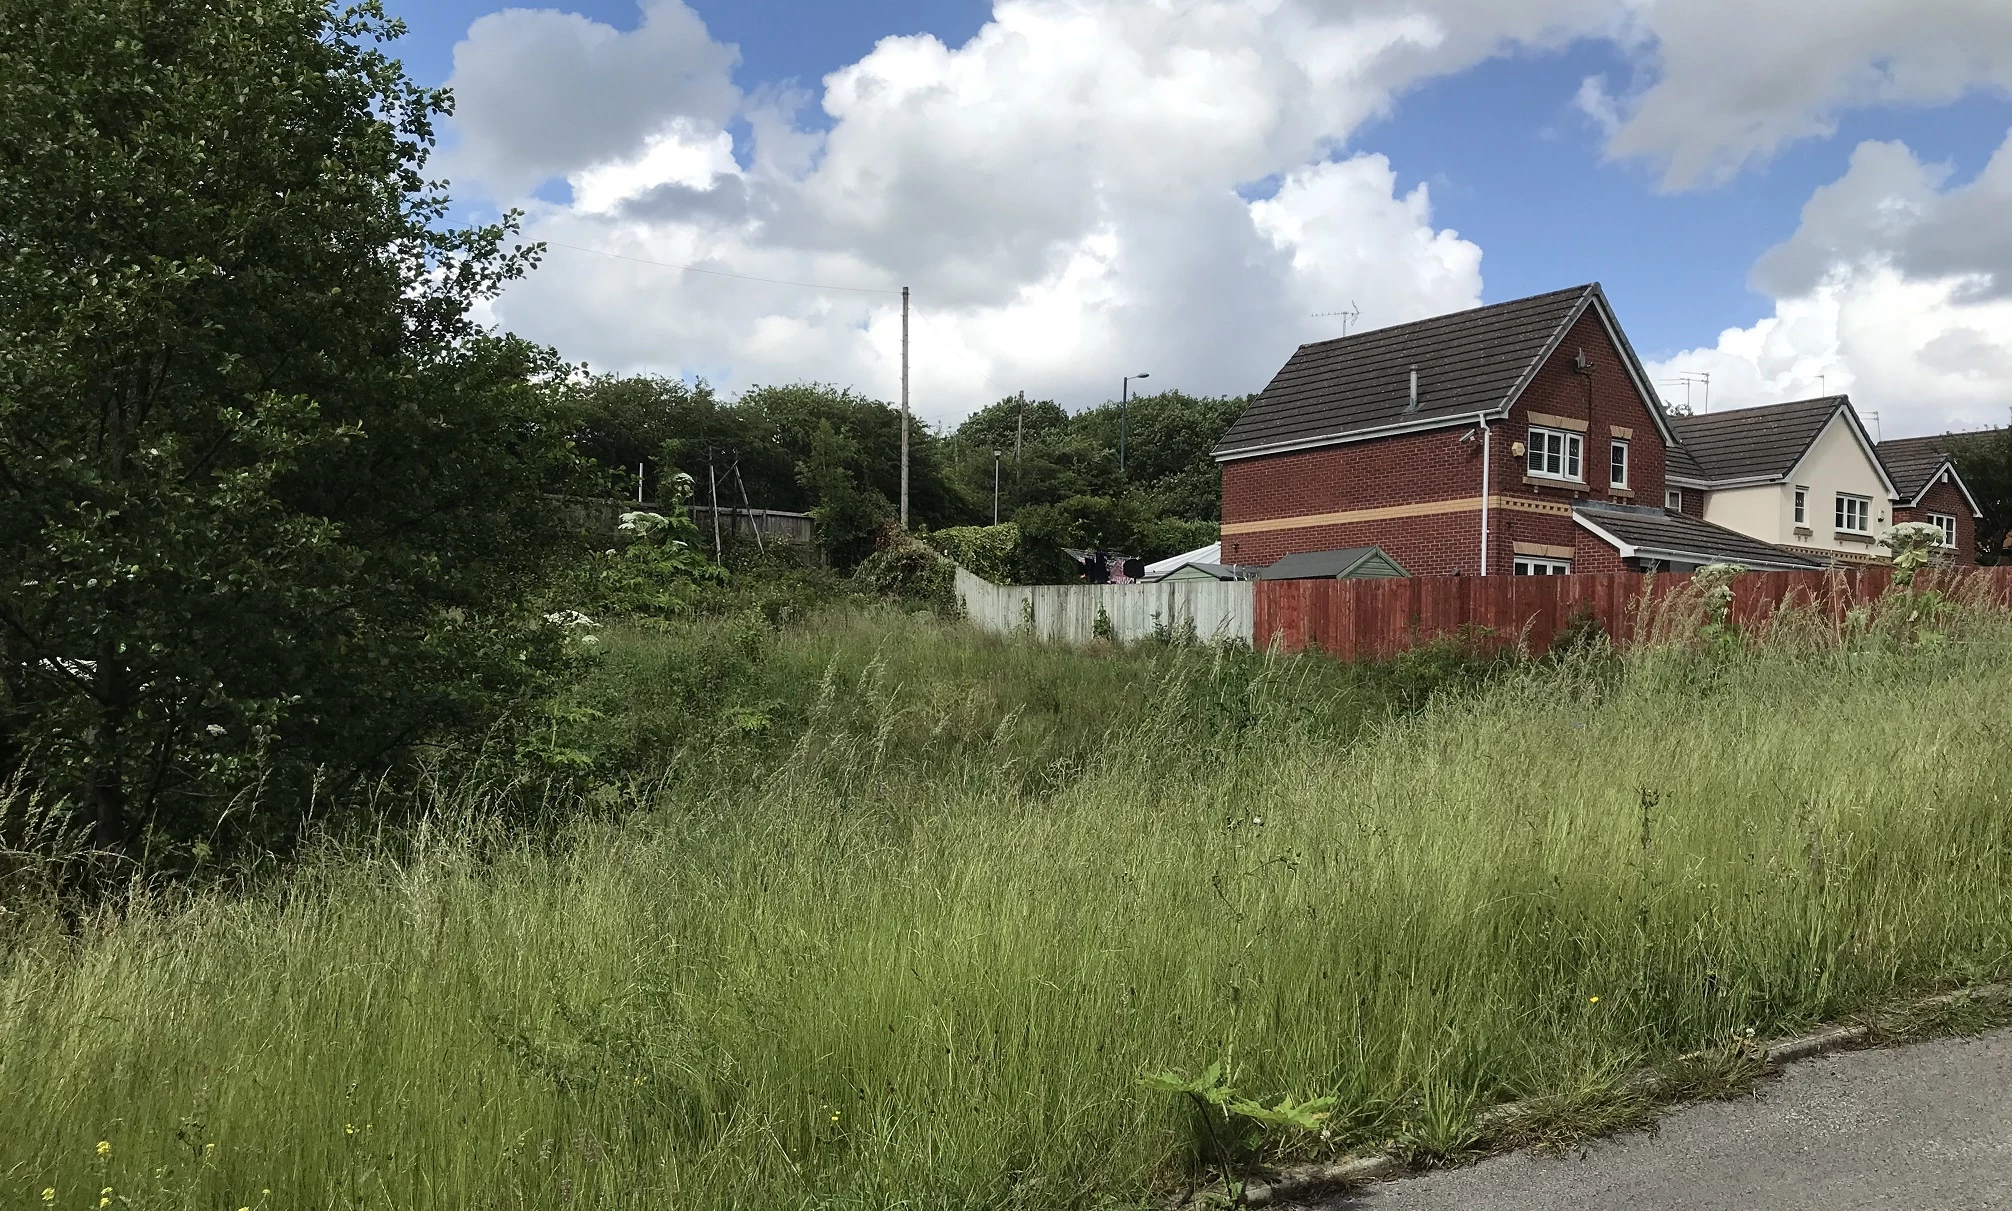 Northern Property Consortium’s newly acquired site on Godley Brook Lane where it will build two new four-bedroom detached homes.